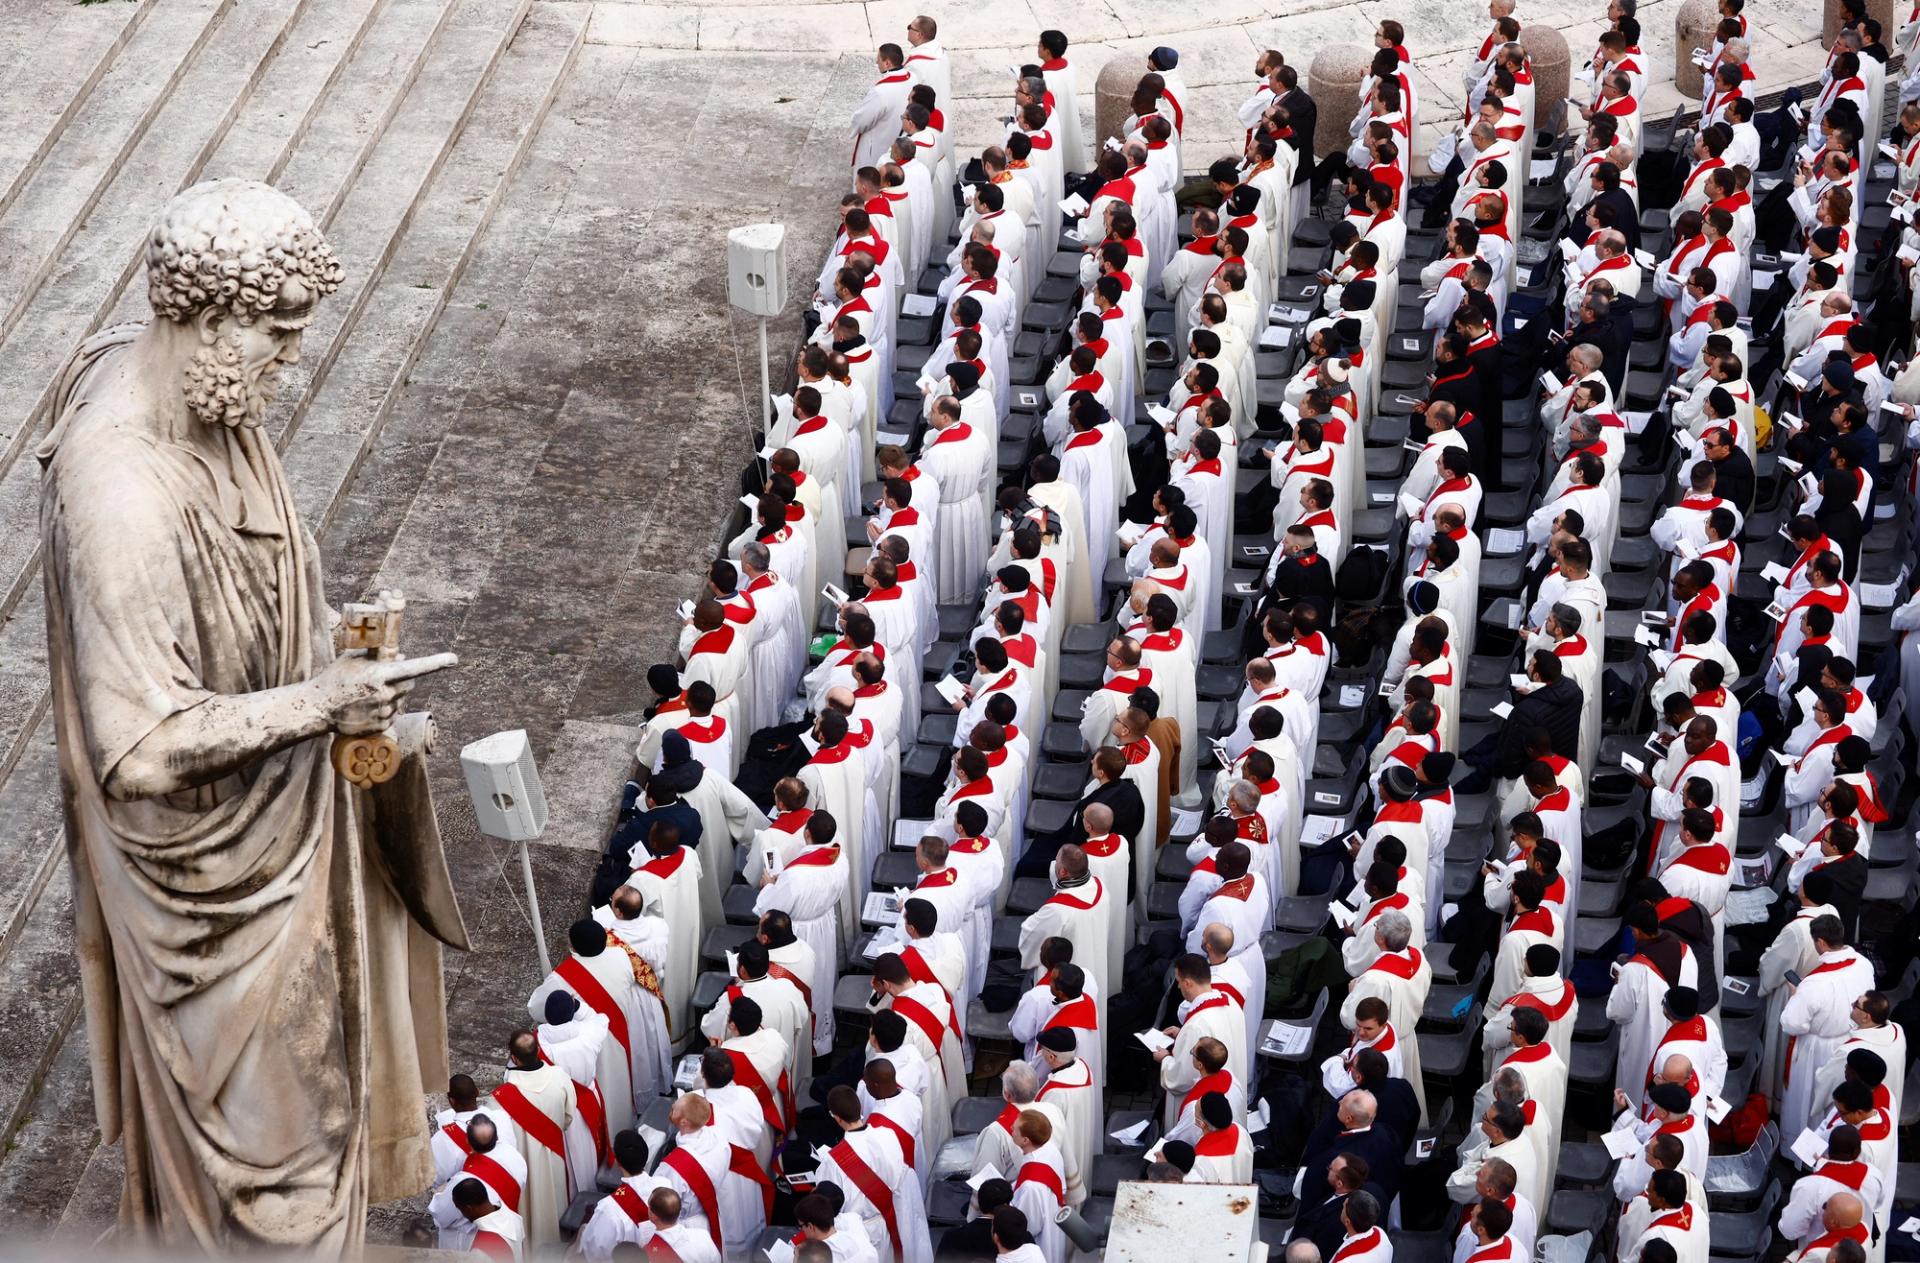 Members of the clergy attend the funeral of former Pope Benedict in St. Peter's Square at the Vatican.